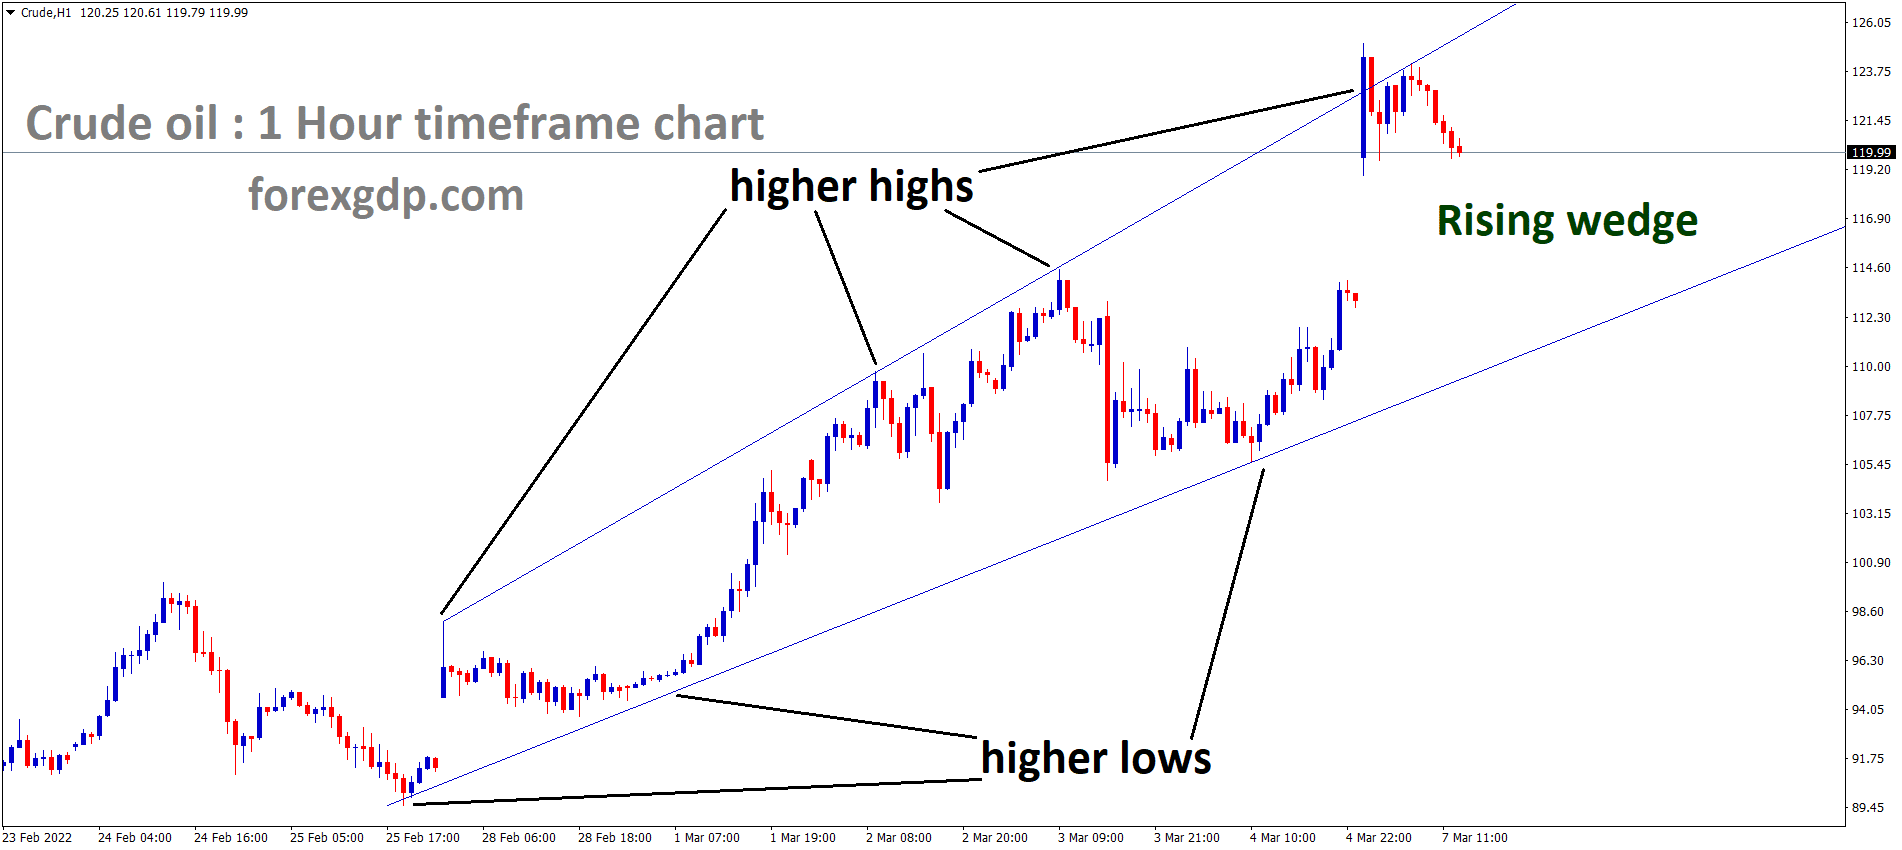 Crude Oil is moving in the Rising Wedge Pattern and the market has fallen from the higher high area of the pattern